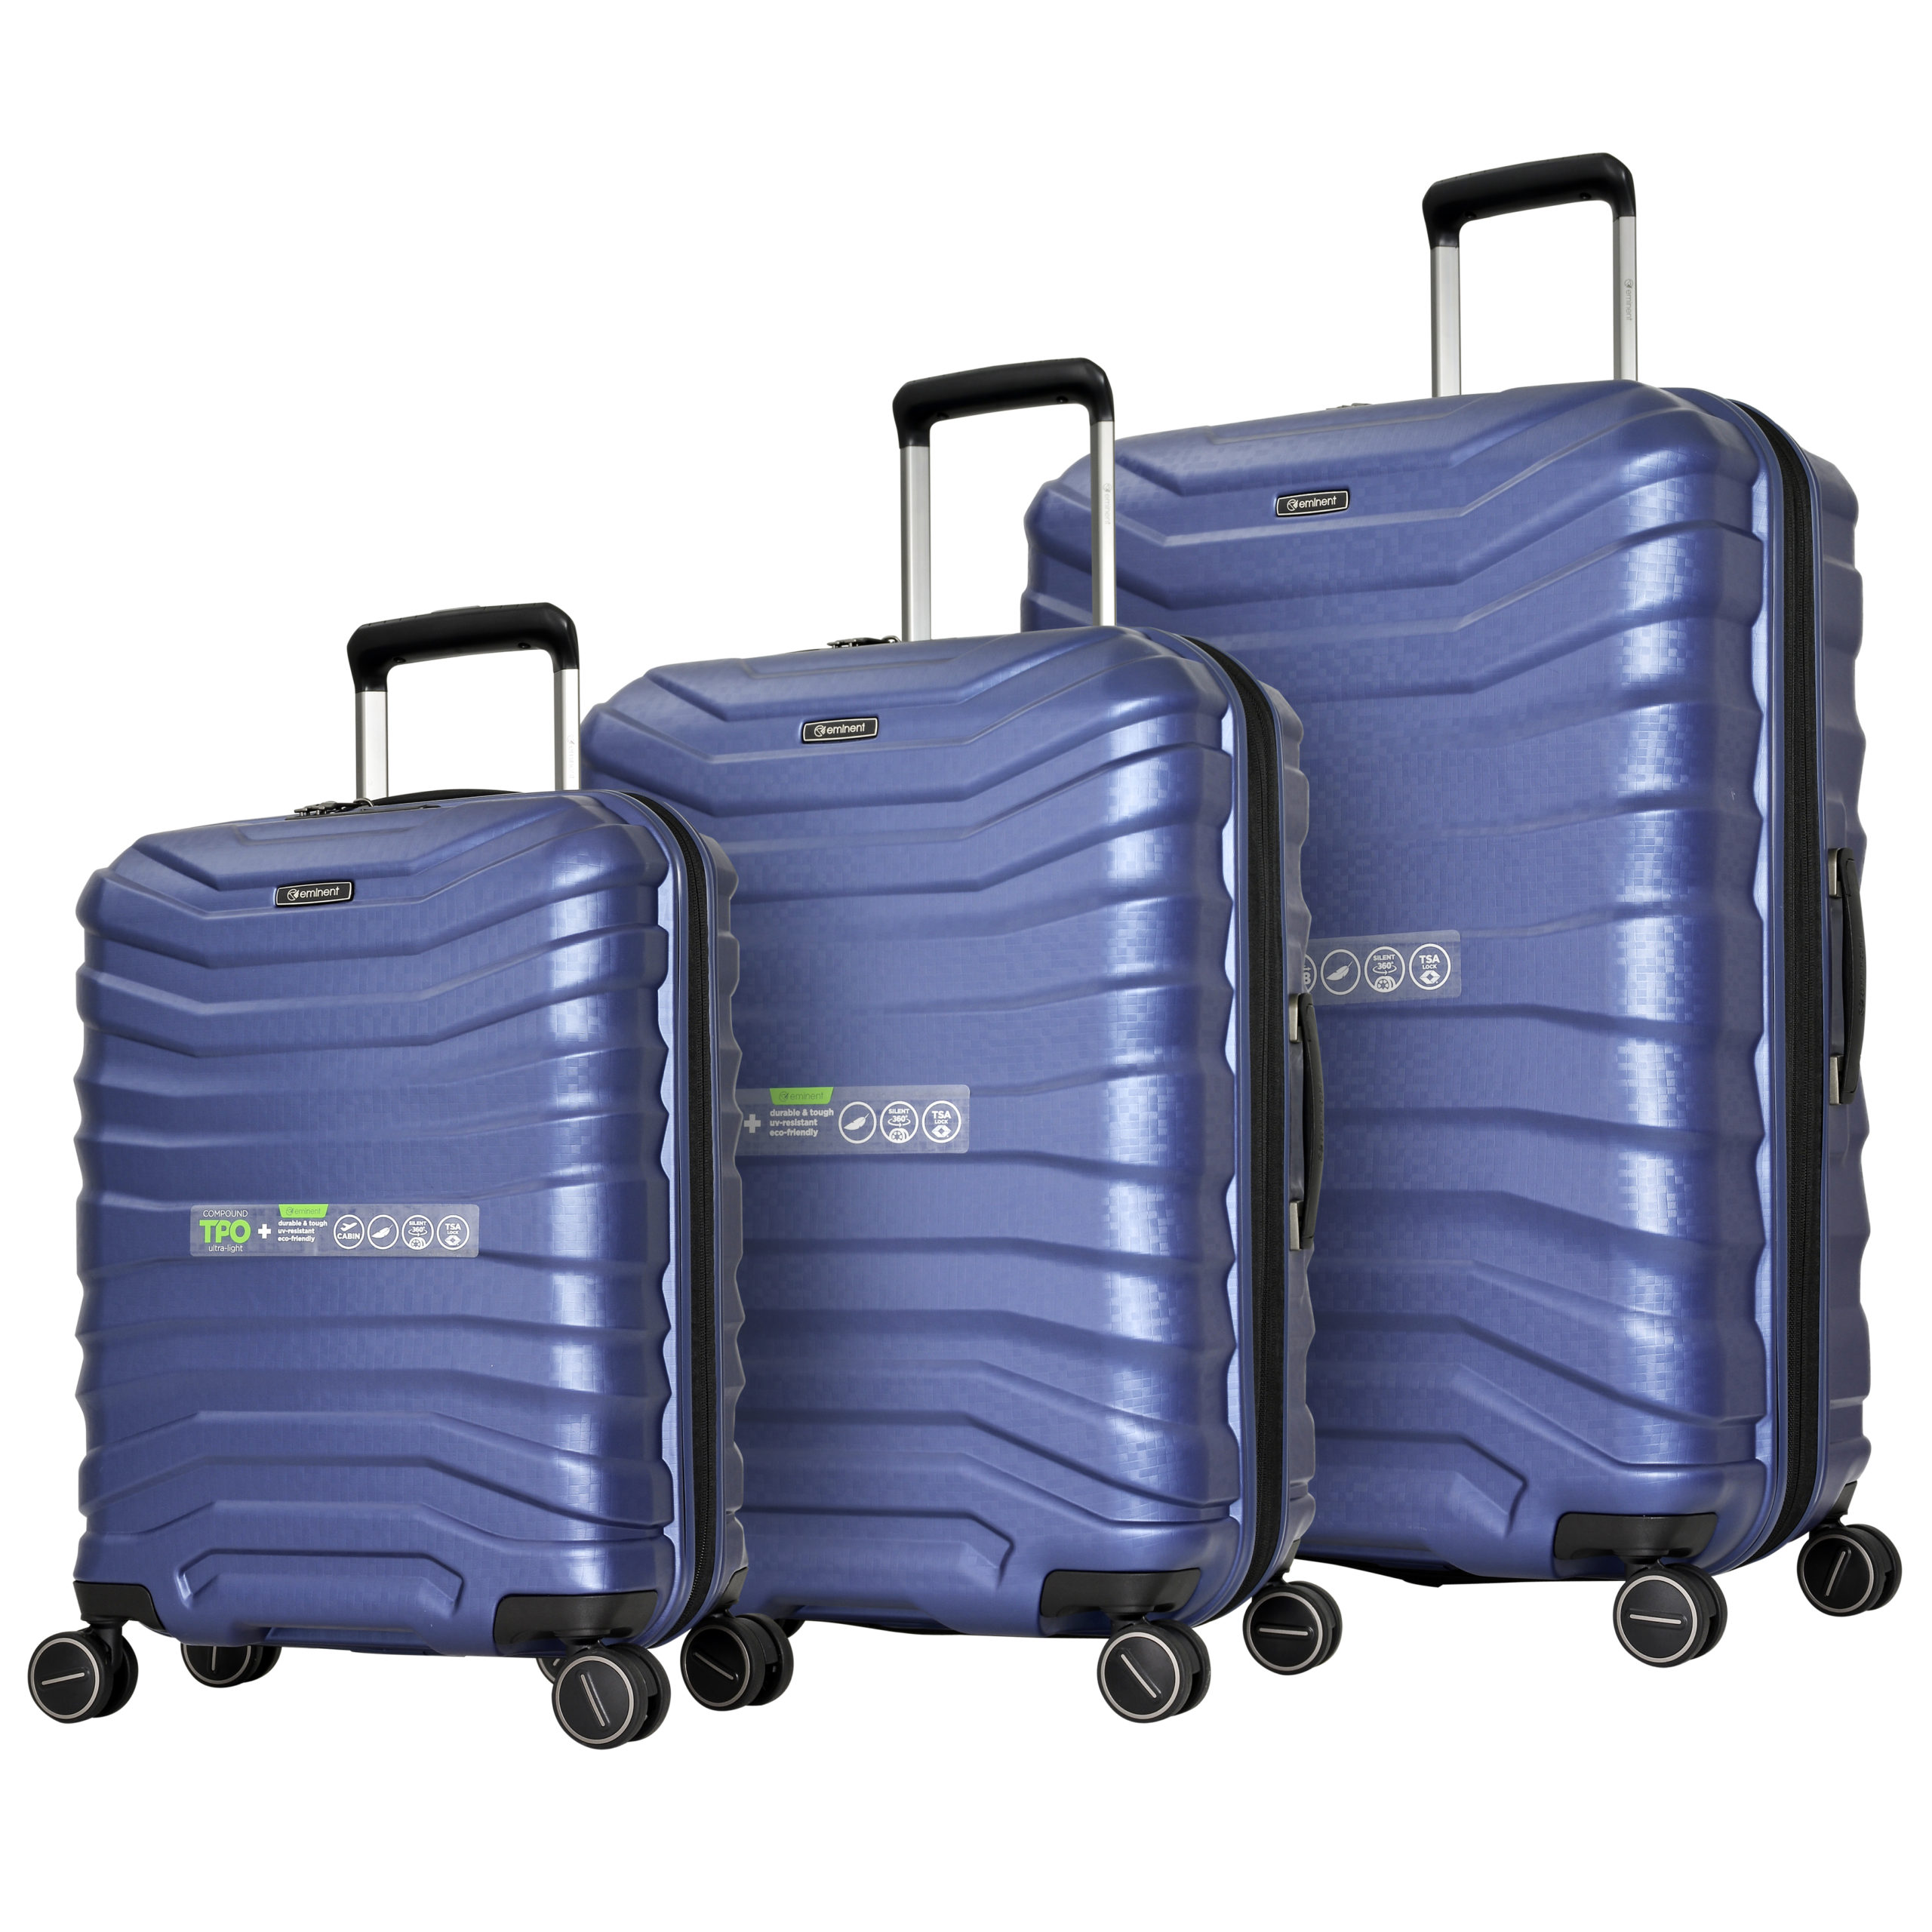 Large sized checked luggage trolley by Eminent (KG18-28)